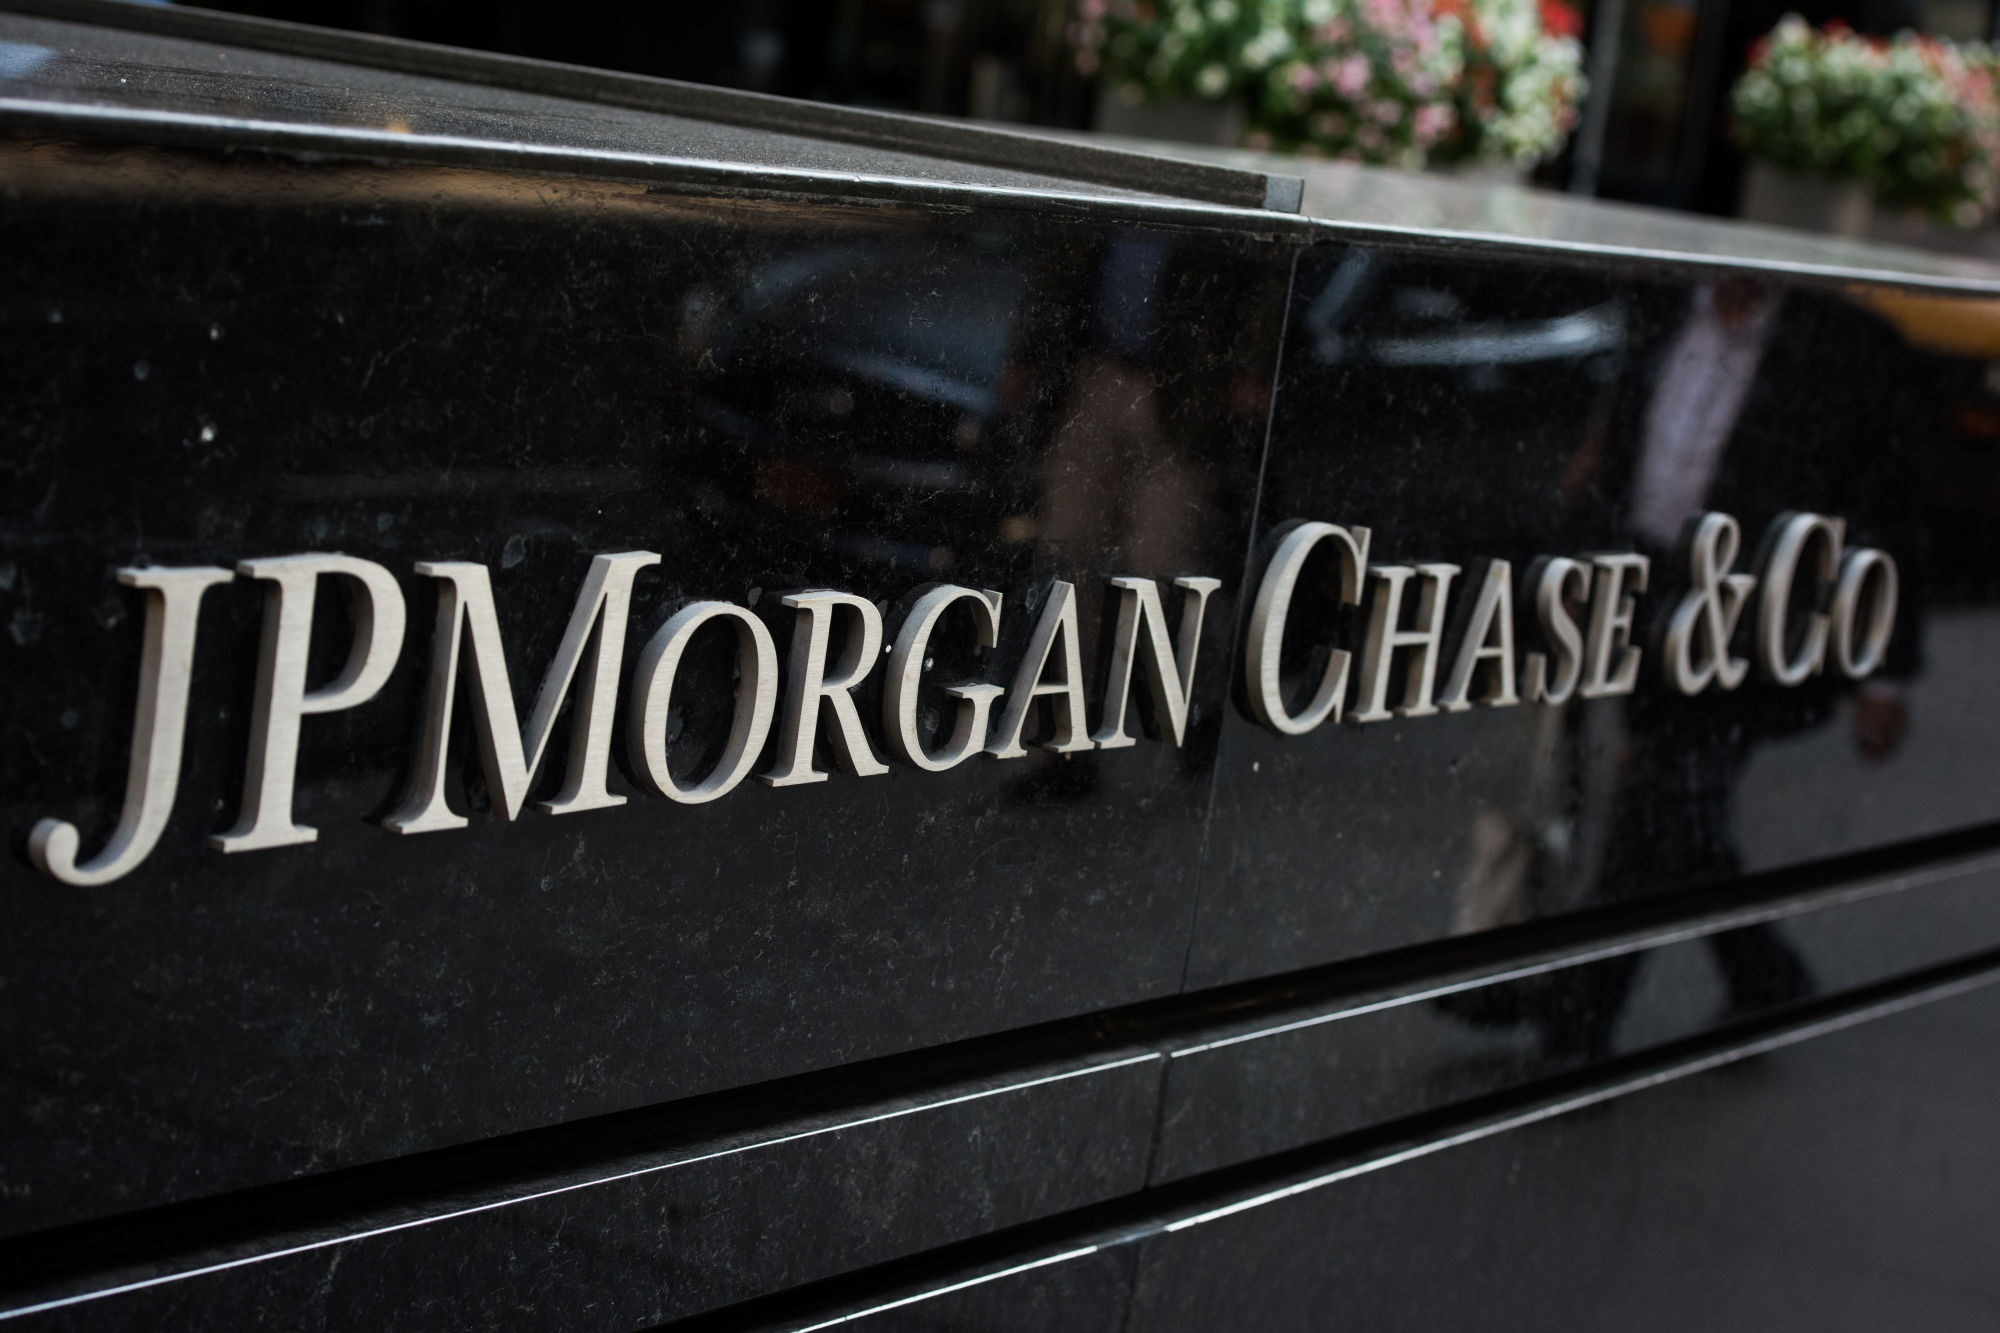 A JPMorgan Chase & Co. Bank Branch Ahead Of Earnings Figures